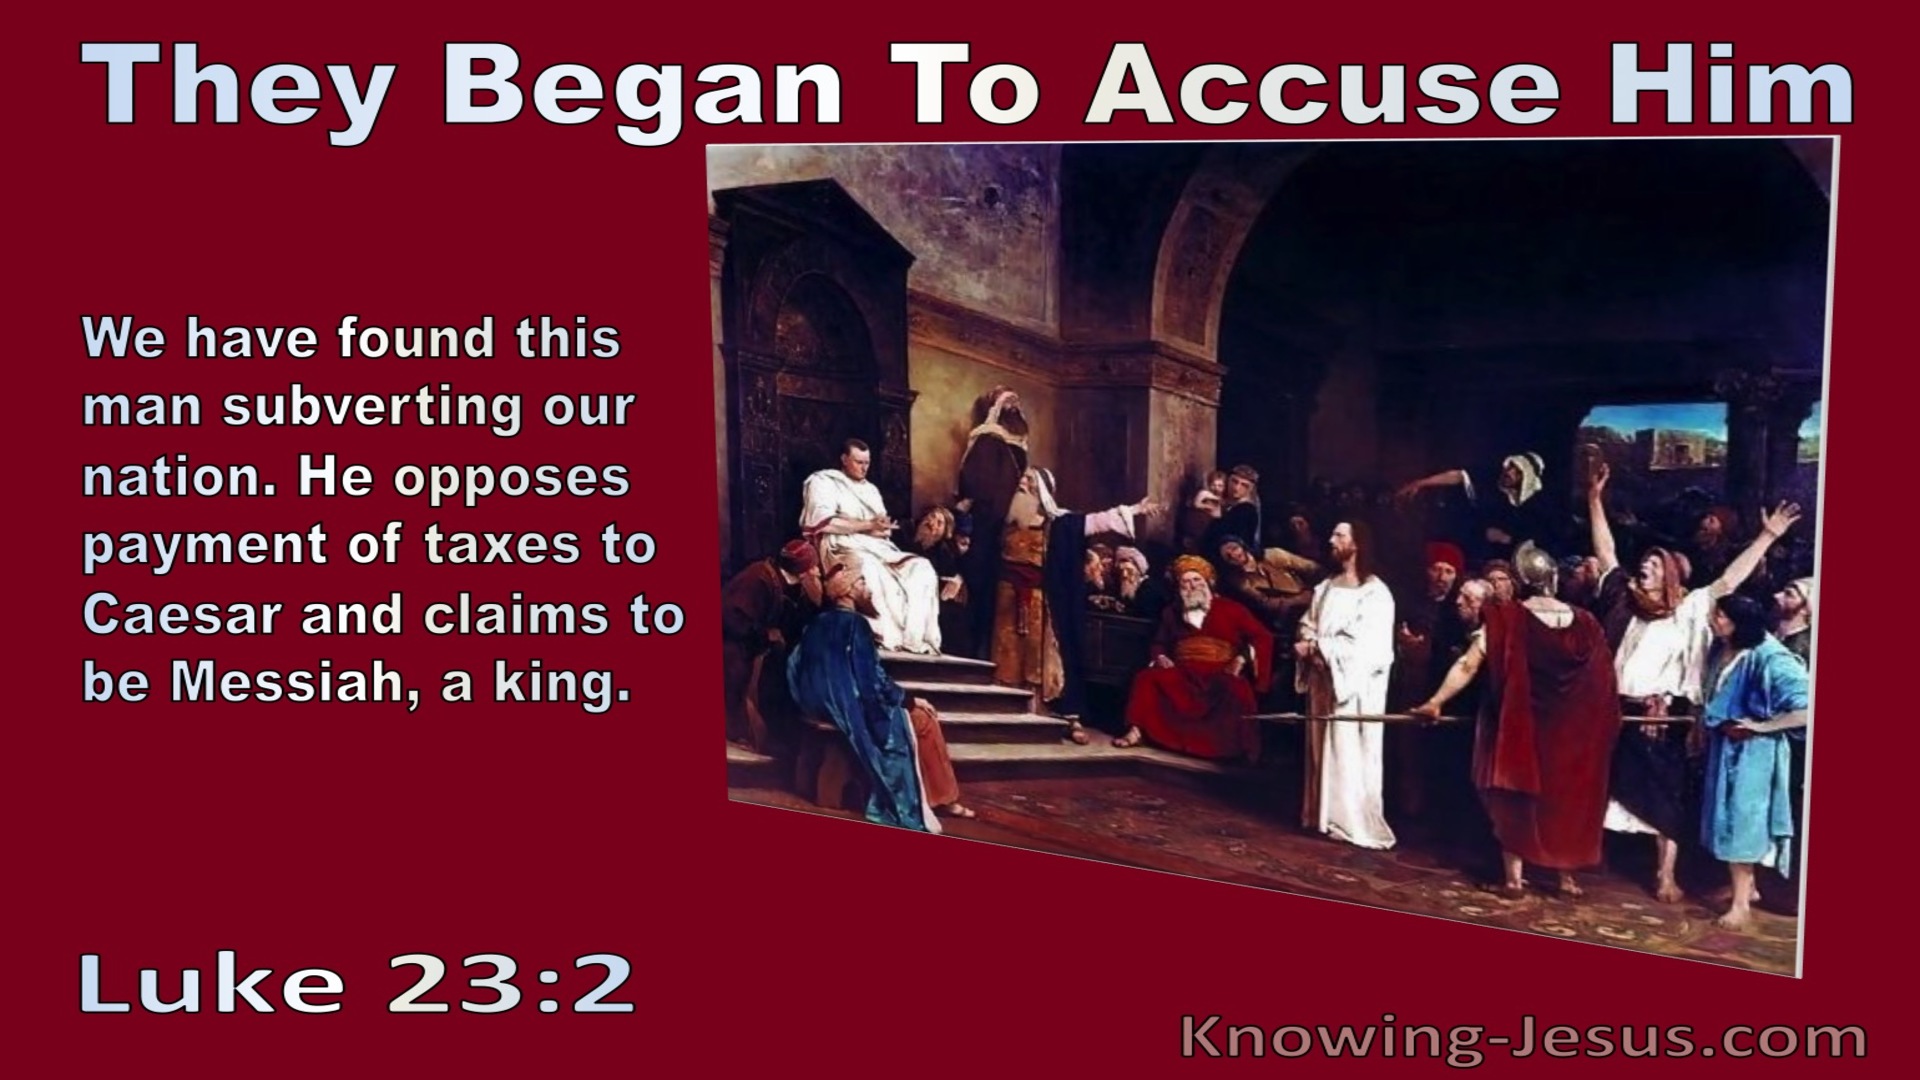 Luke 23:2 They Began To Accuse Him Sayind We Found This Man Subverting Our Nation (red)